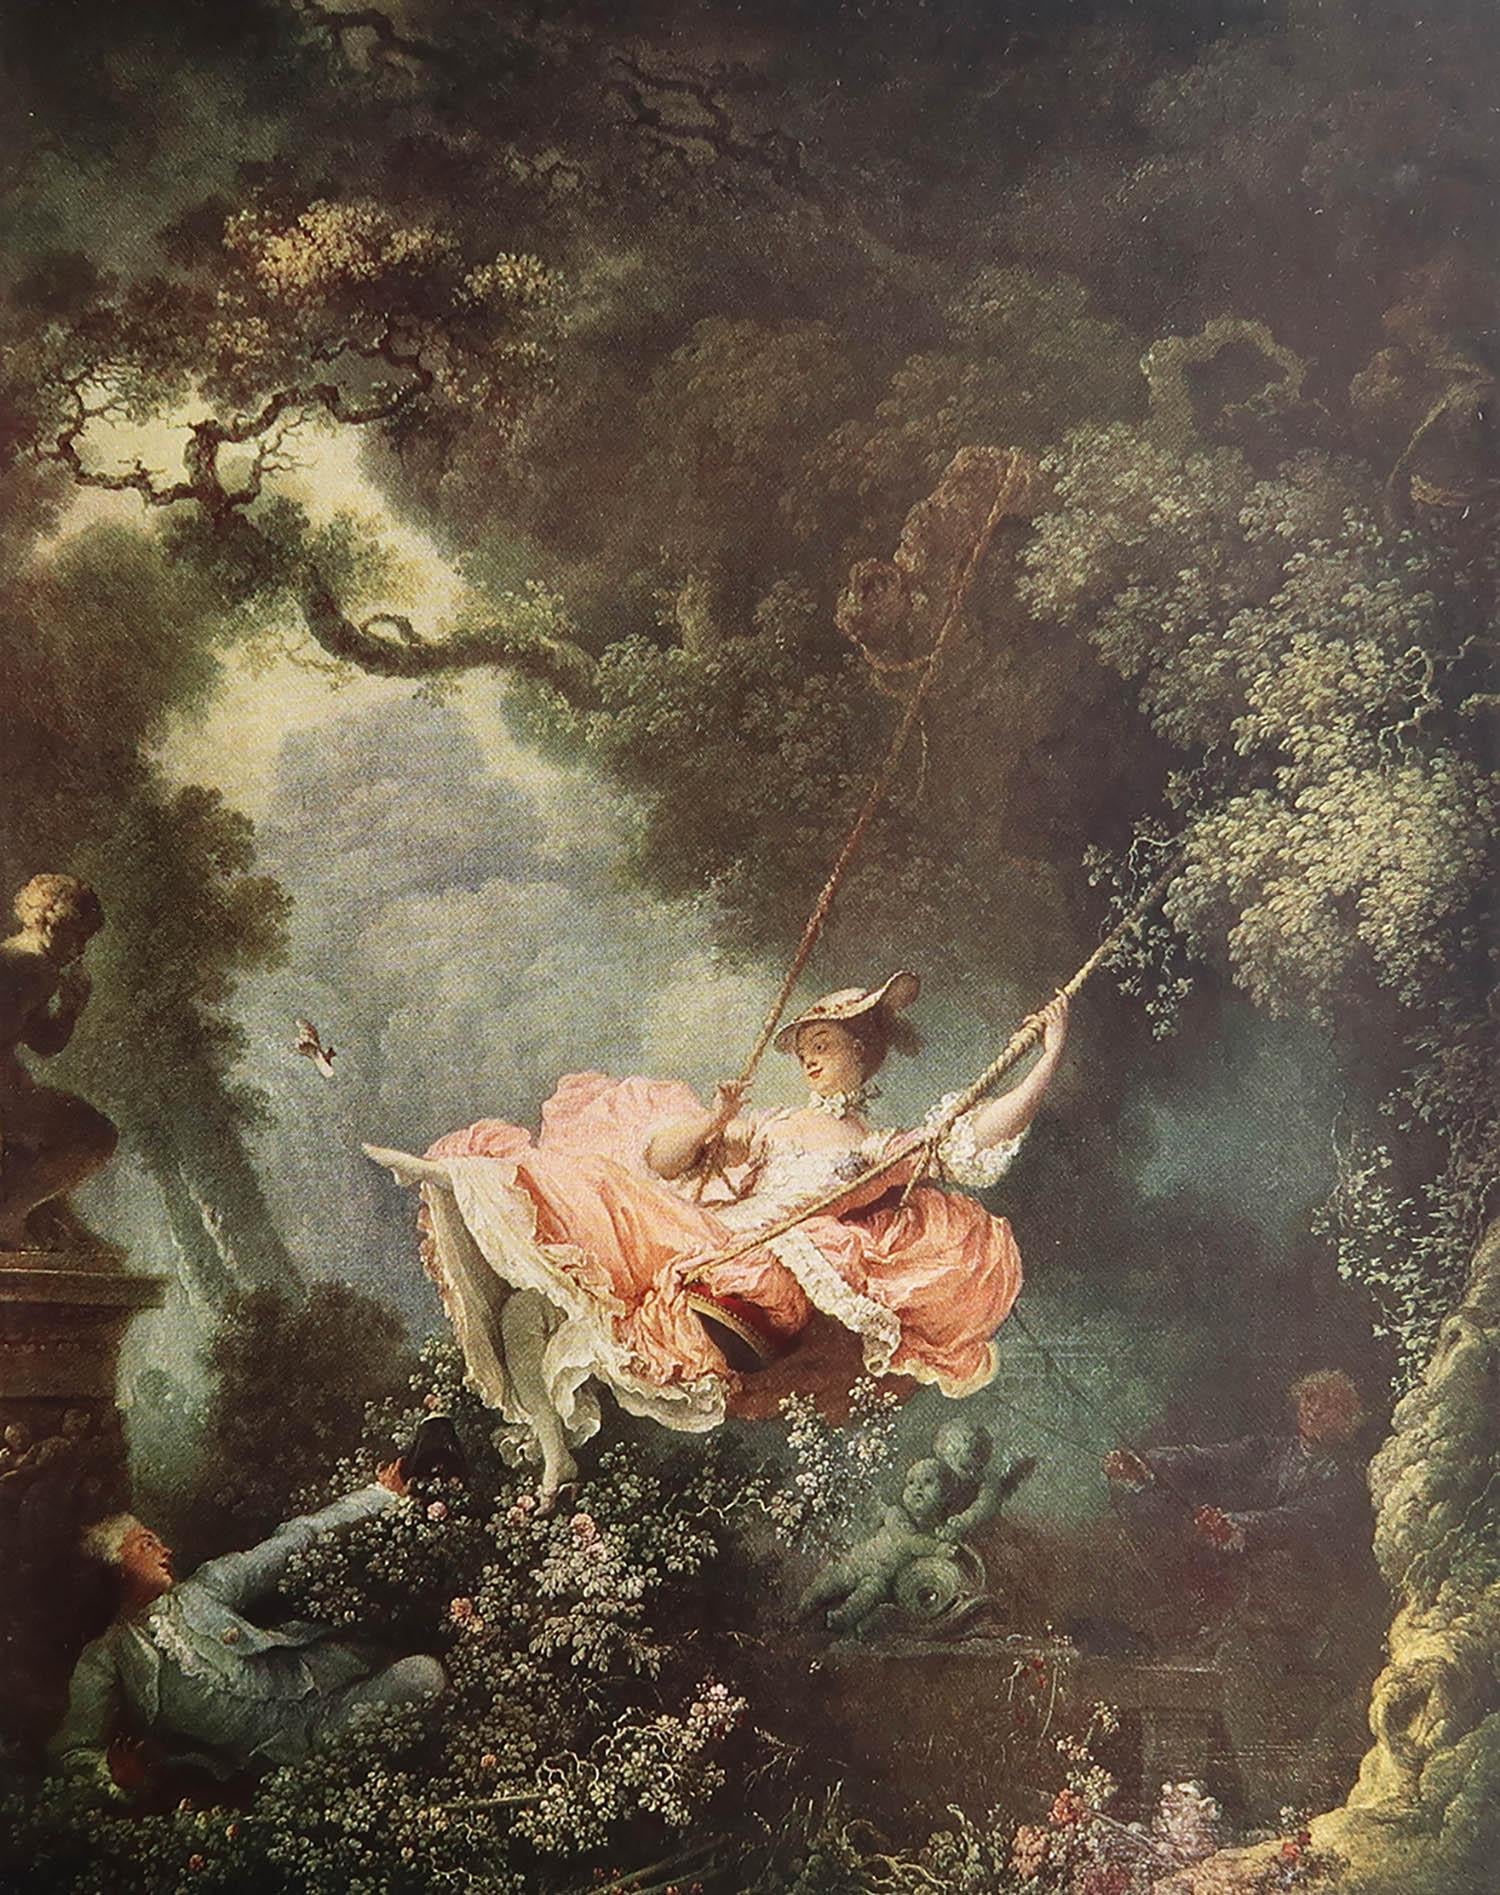 Wonderful print after Fragonard

Lovely colors.

Tipped in plate on good quality paper

Chromolithograph 

Published circa 1920

The measurement given below is the white paper size, not the actual image.

Unframed.

